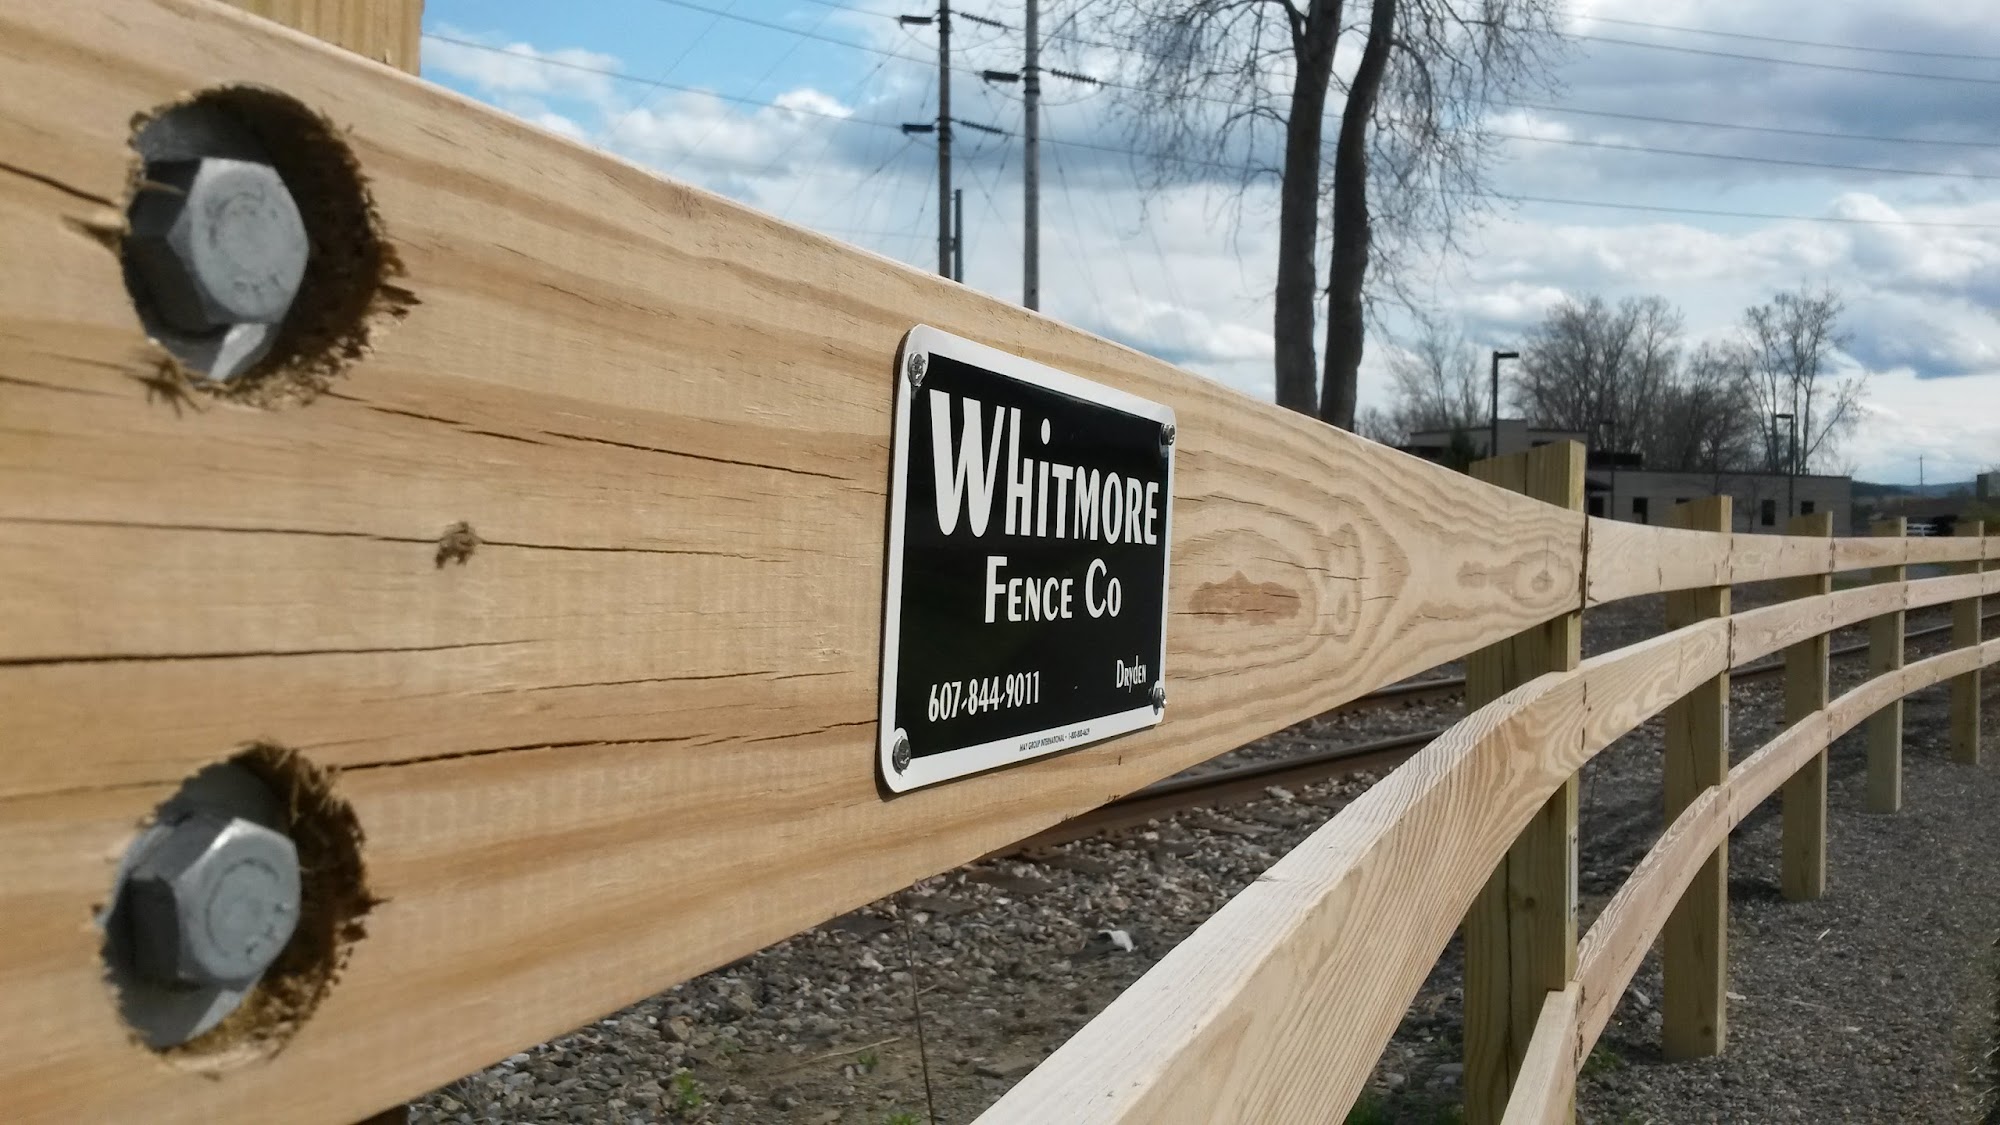 Whitmore Fence Co